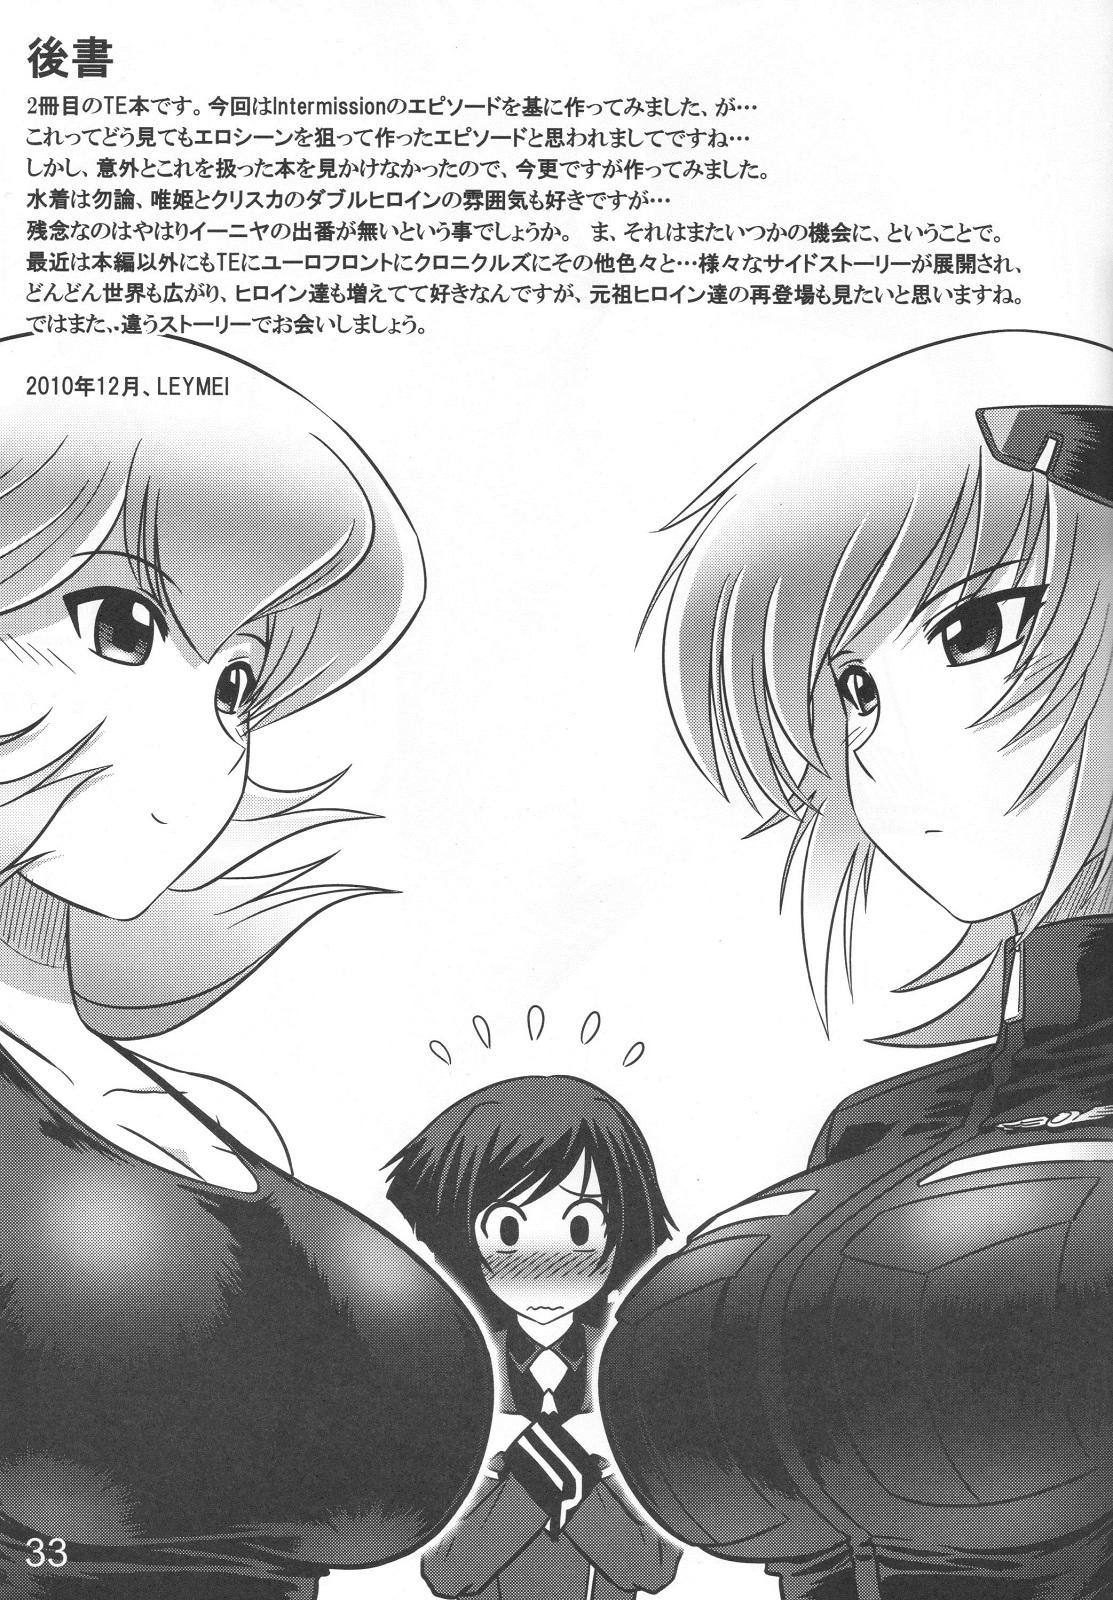 Solo Girl Intermission H - Muv luv alternative total eclipse Guys - Page 33